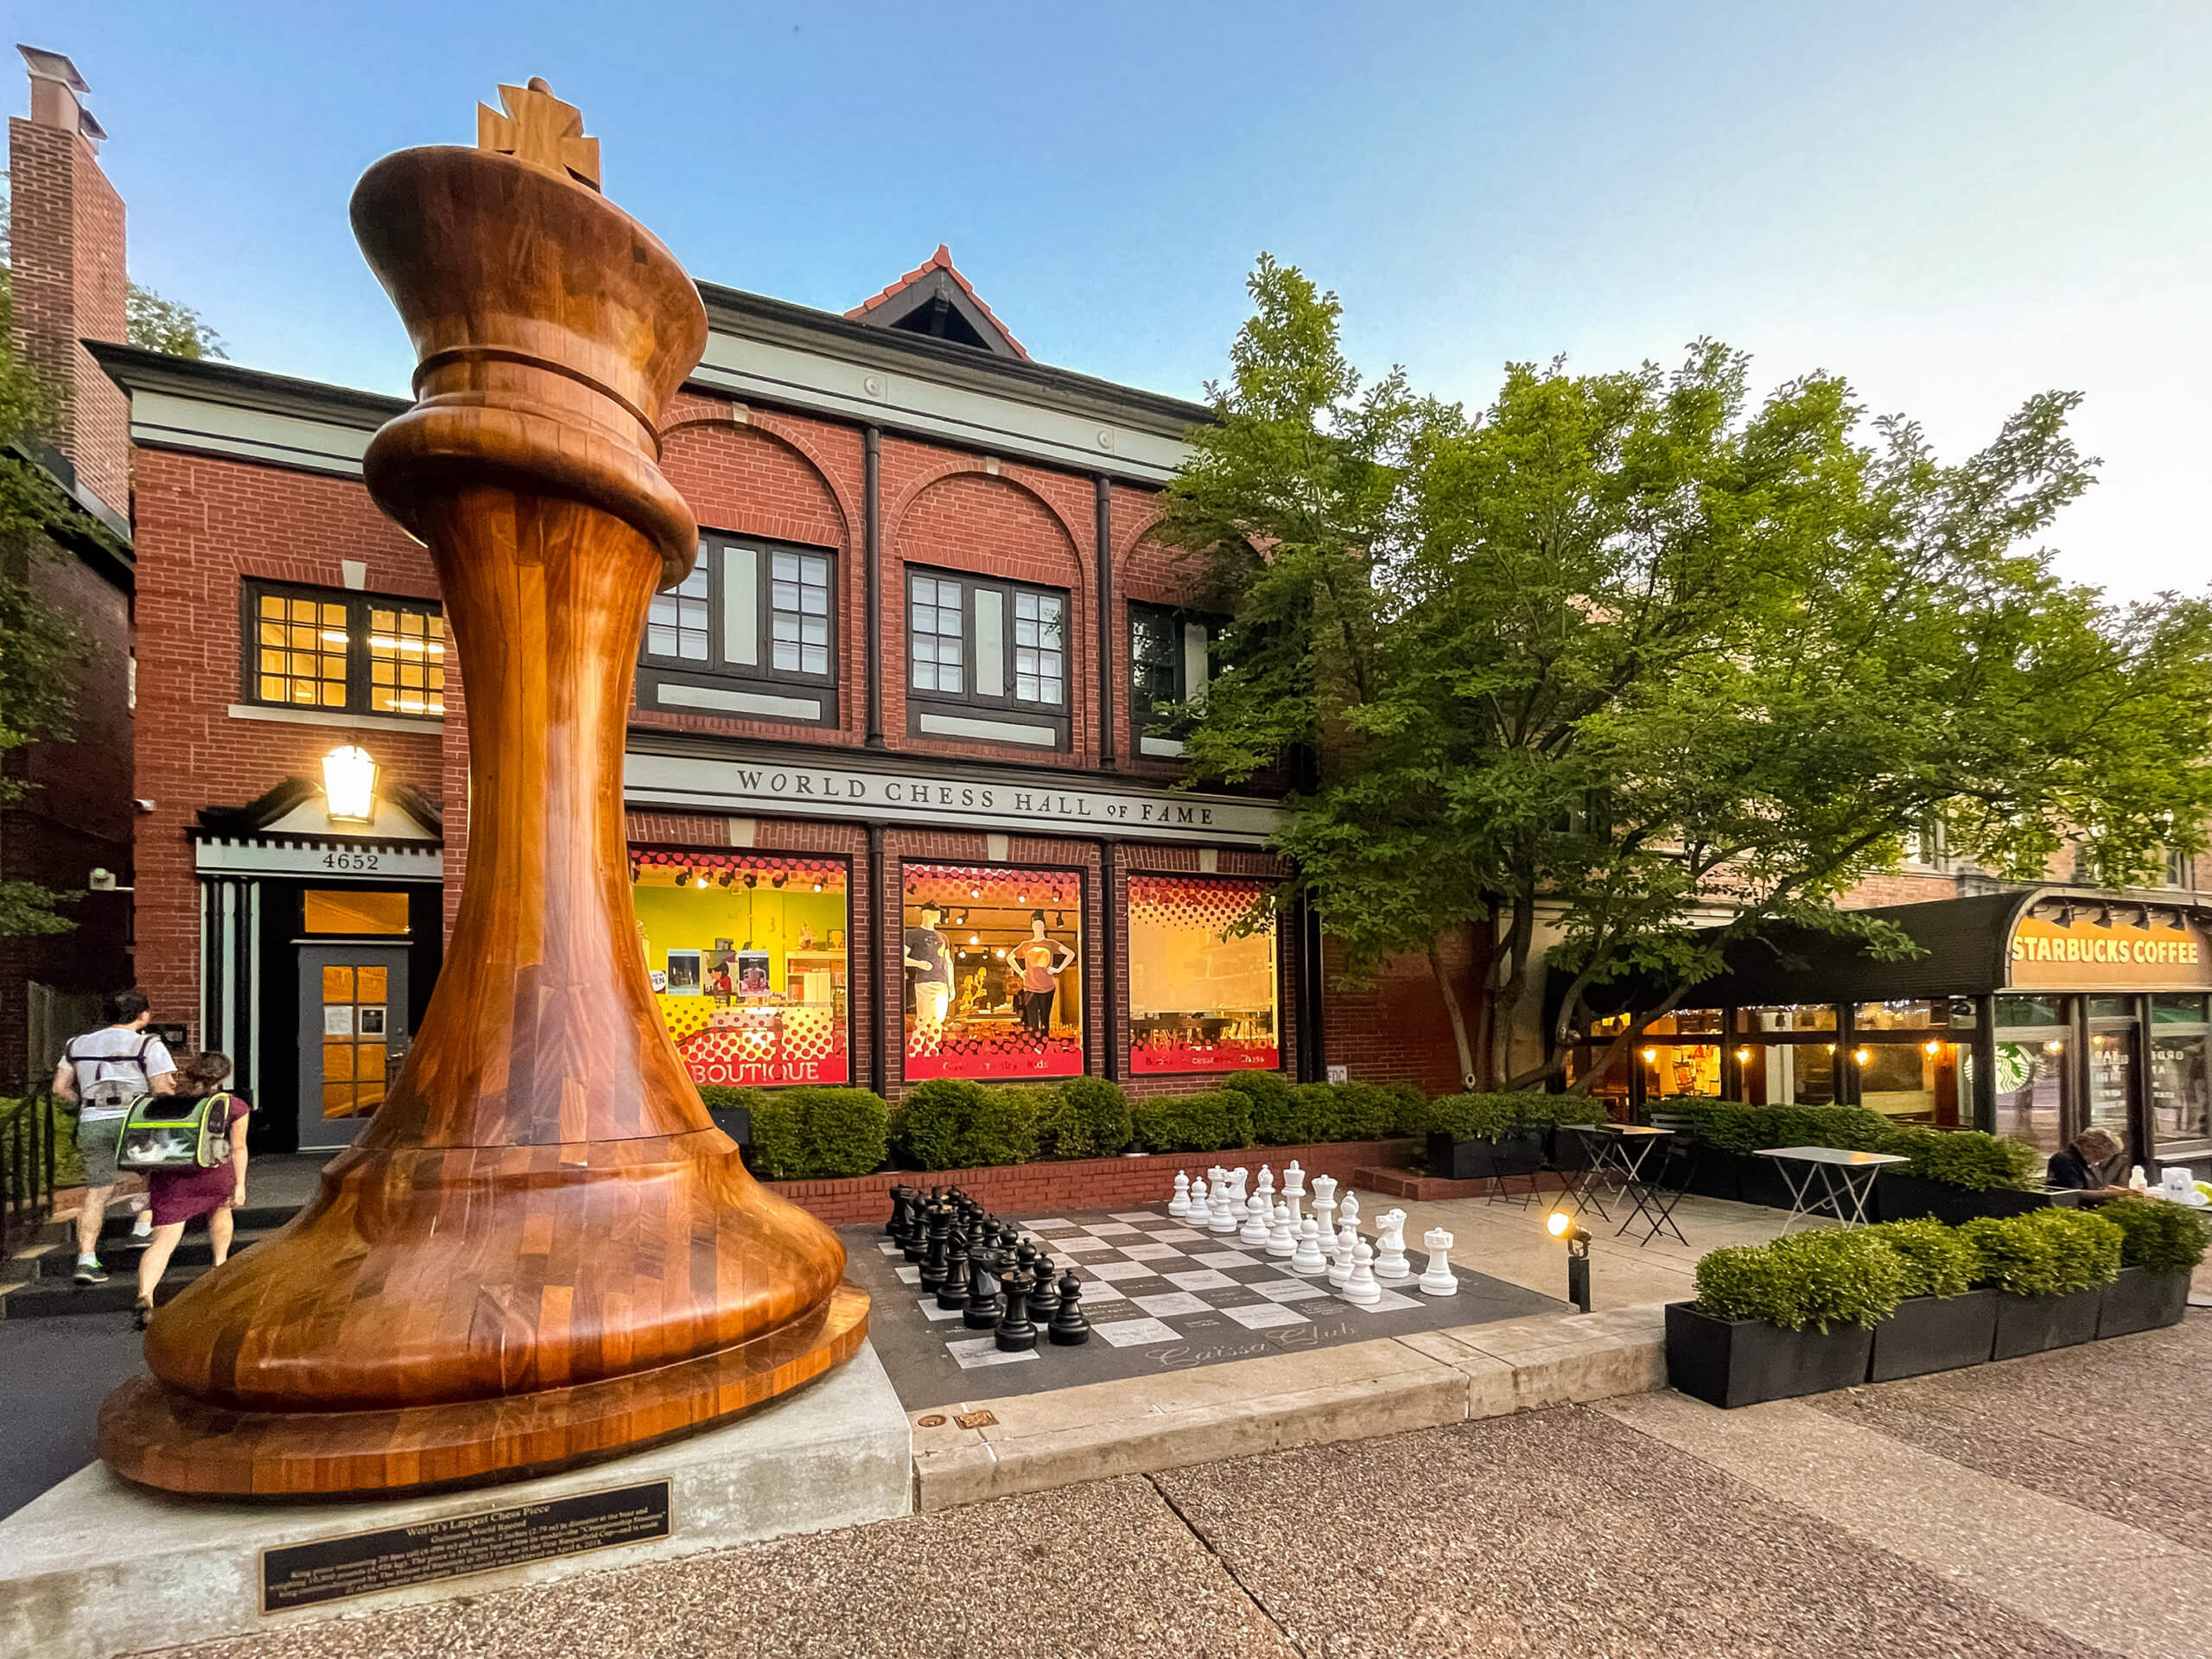 Side-walk view of the Chess Hall of Fame, located in the Central West End neighborhood in St. Louis, MO